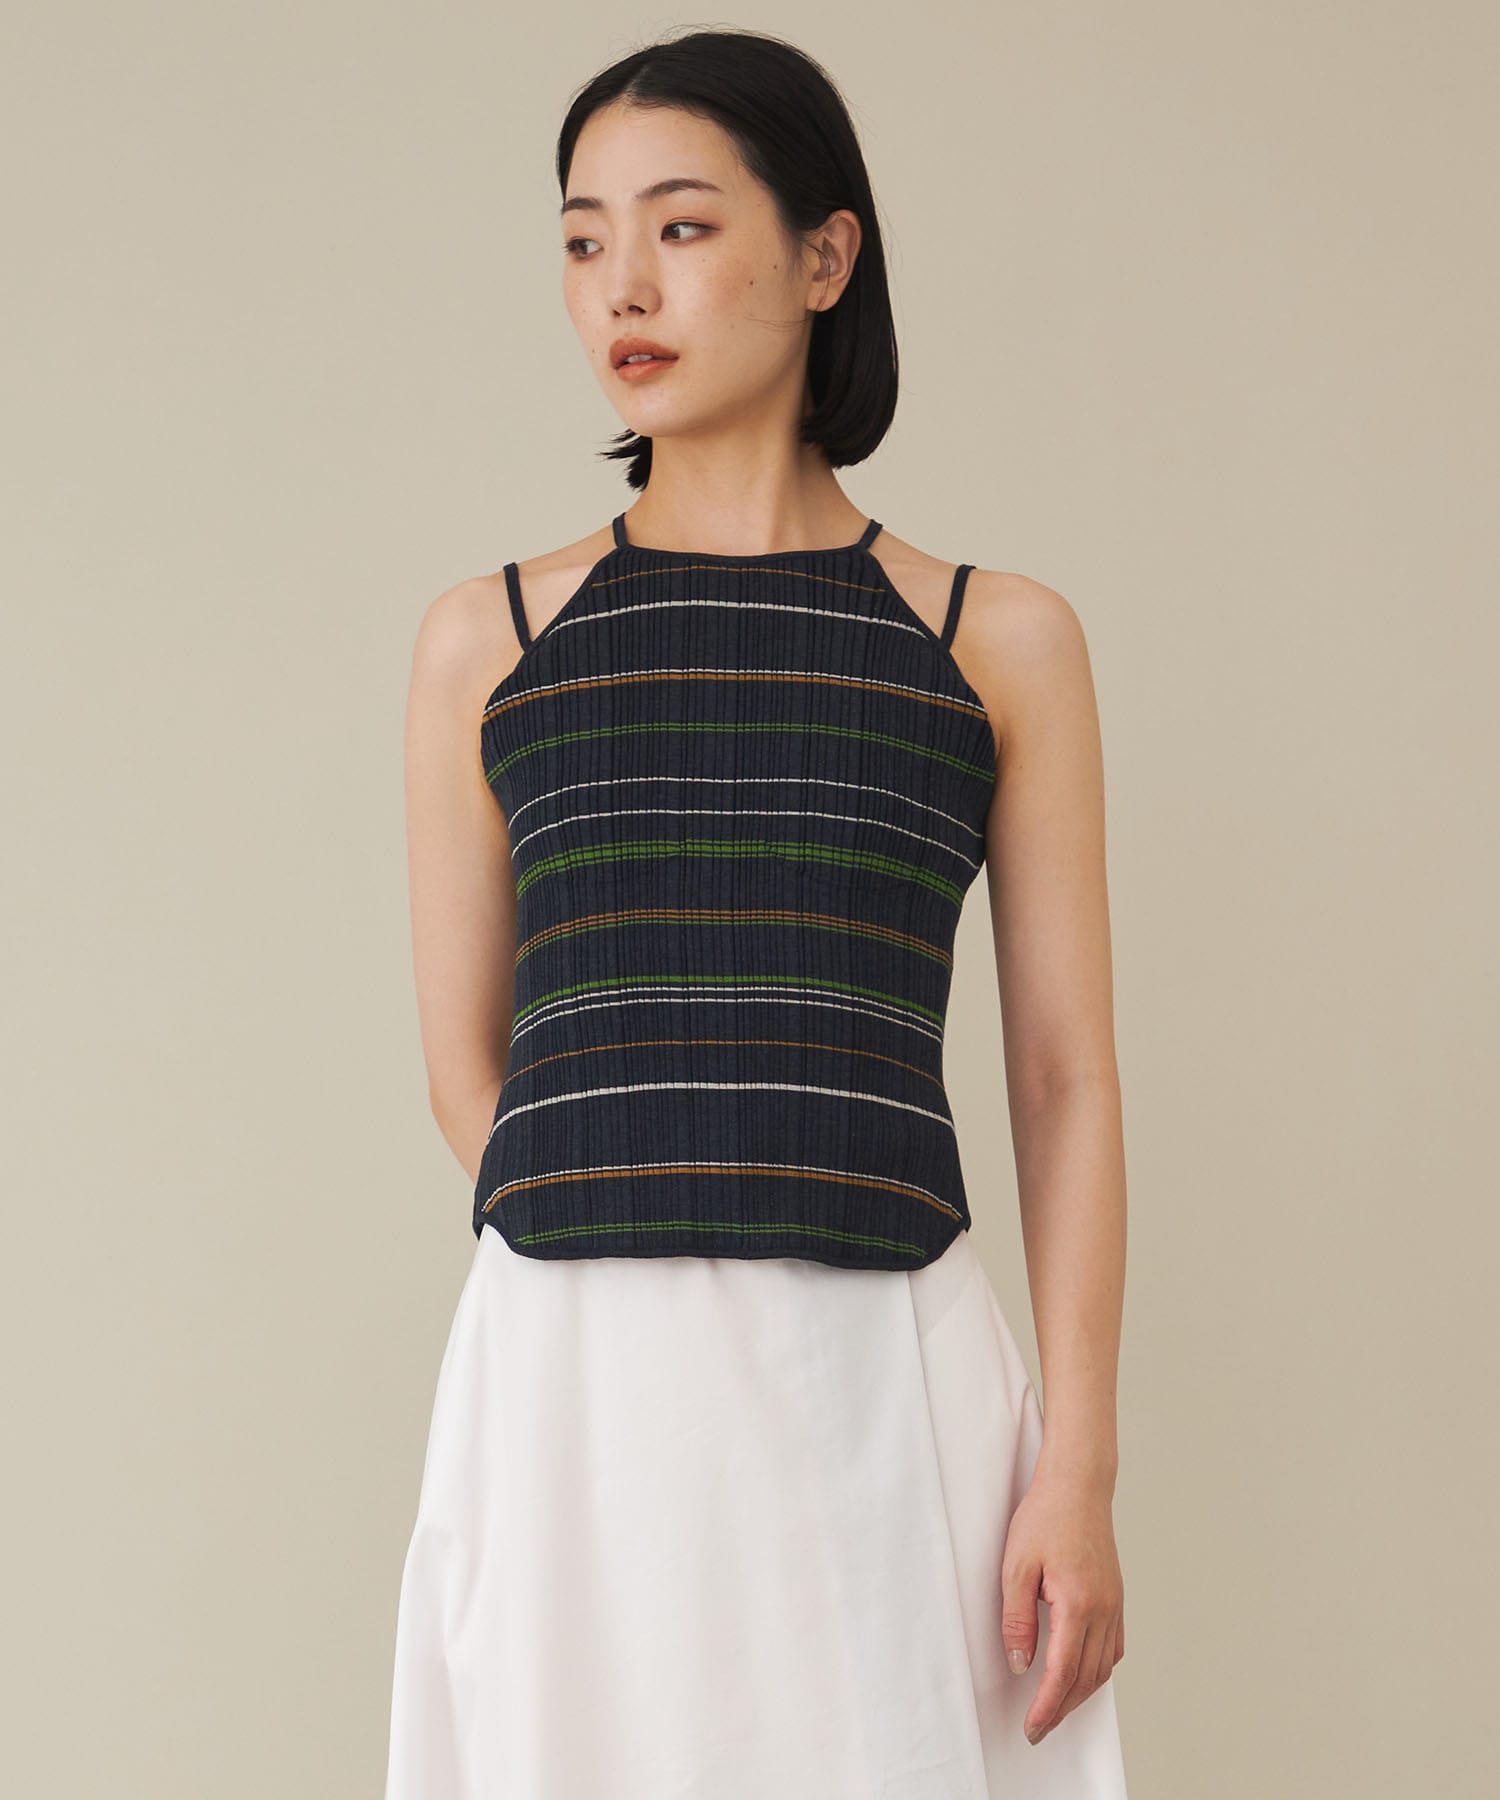 Mame Random Ribbed Plaid Knitted Top | www.innoveering.net